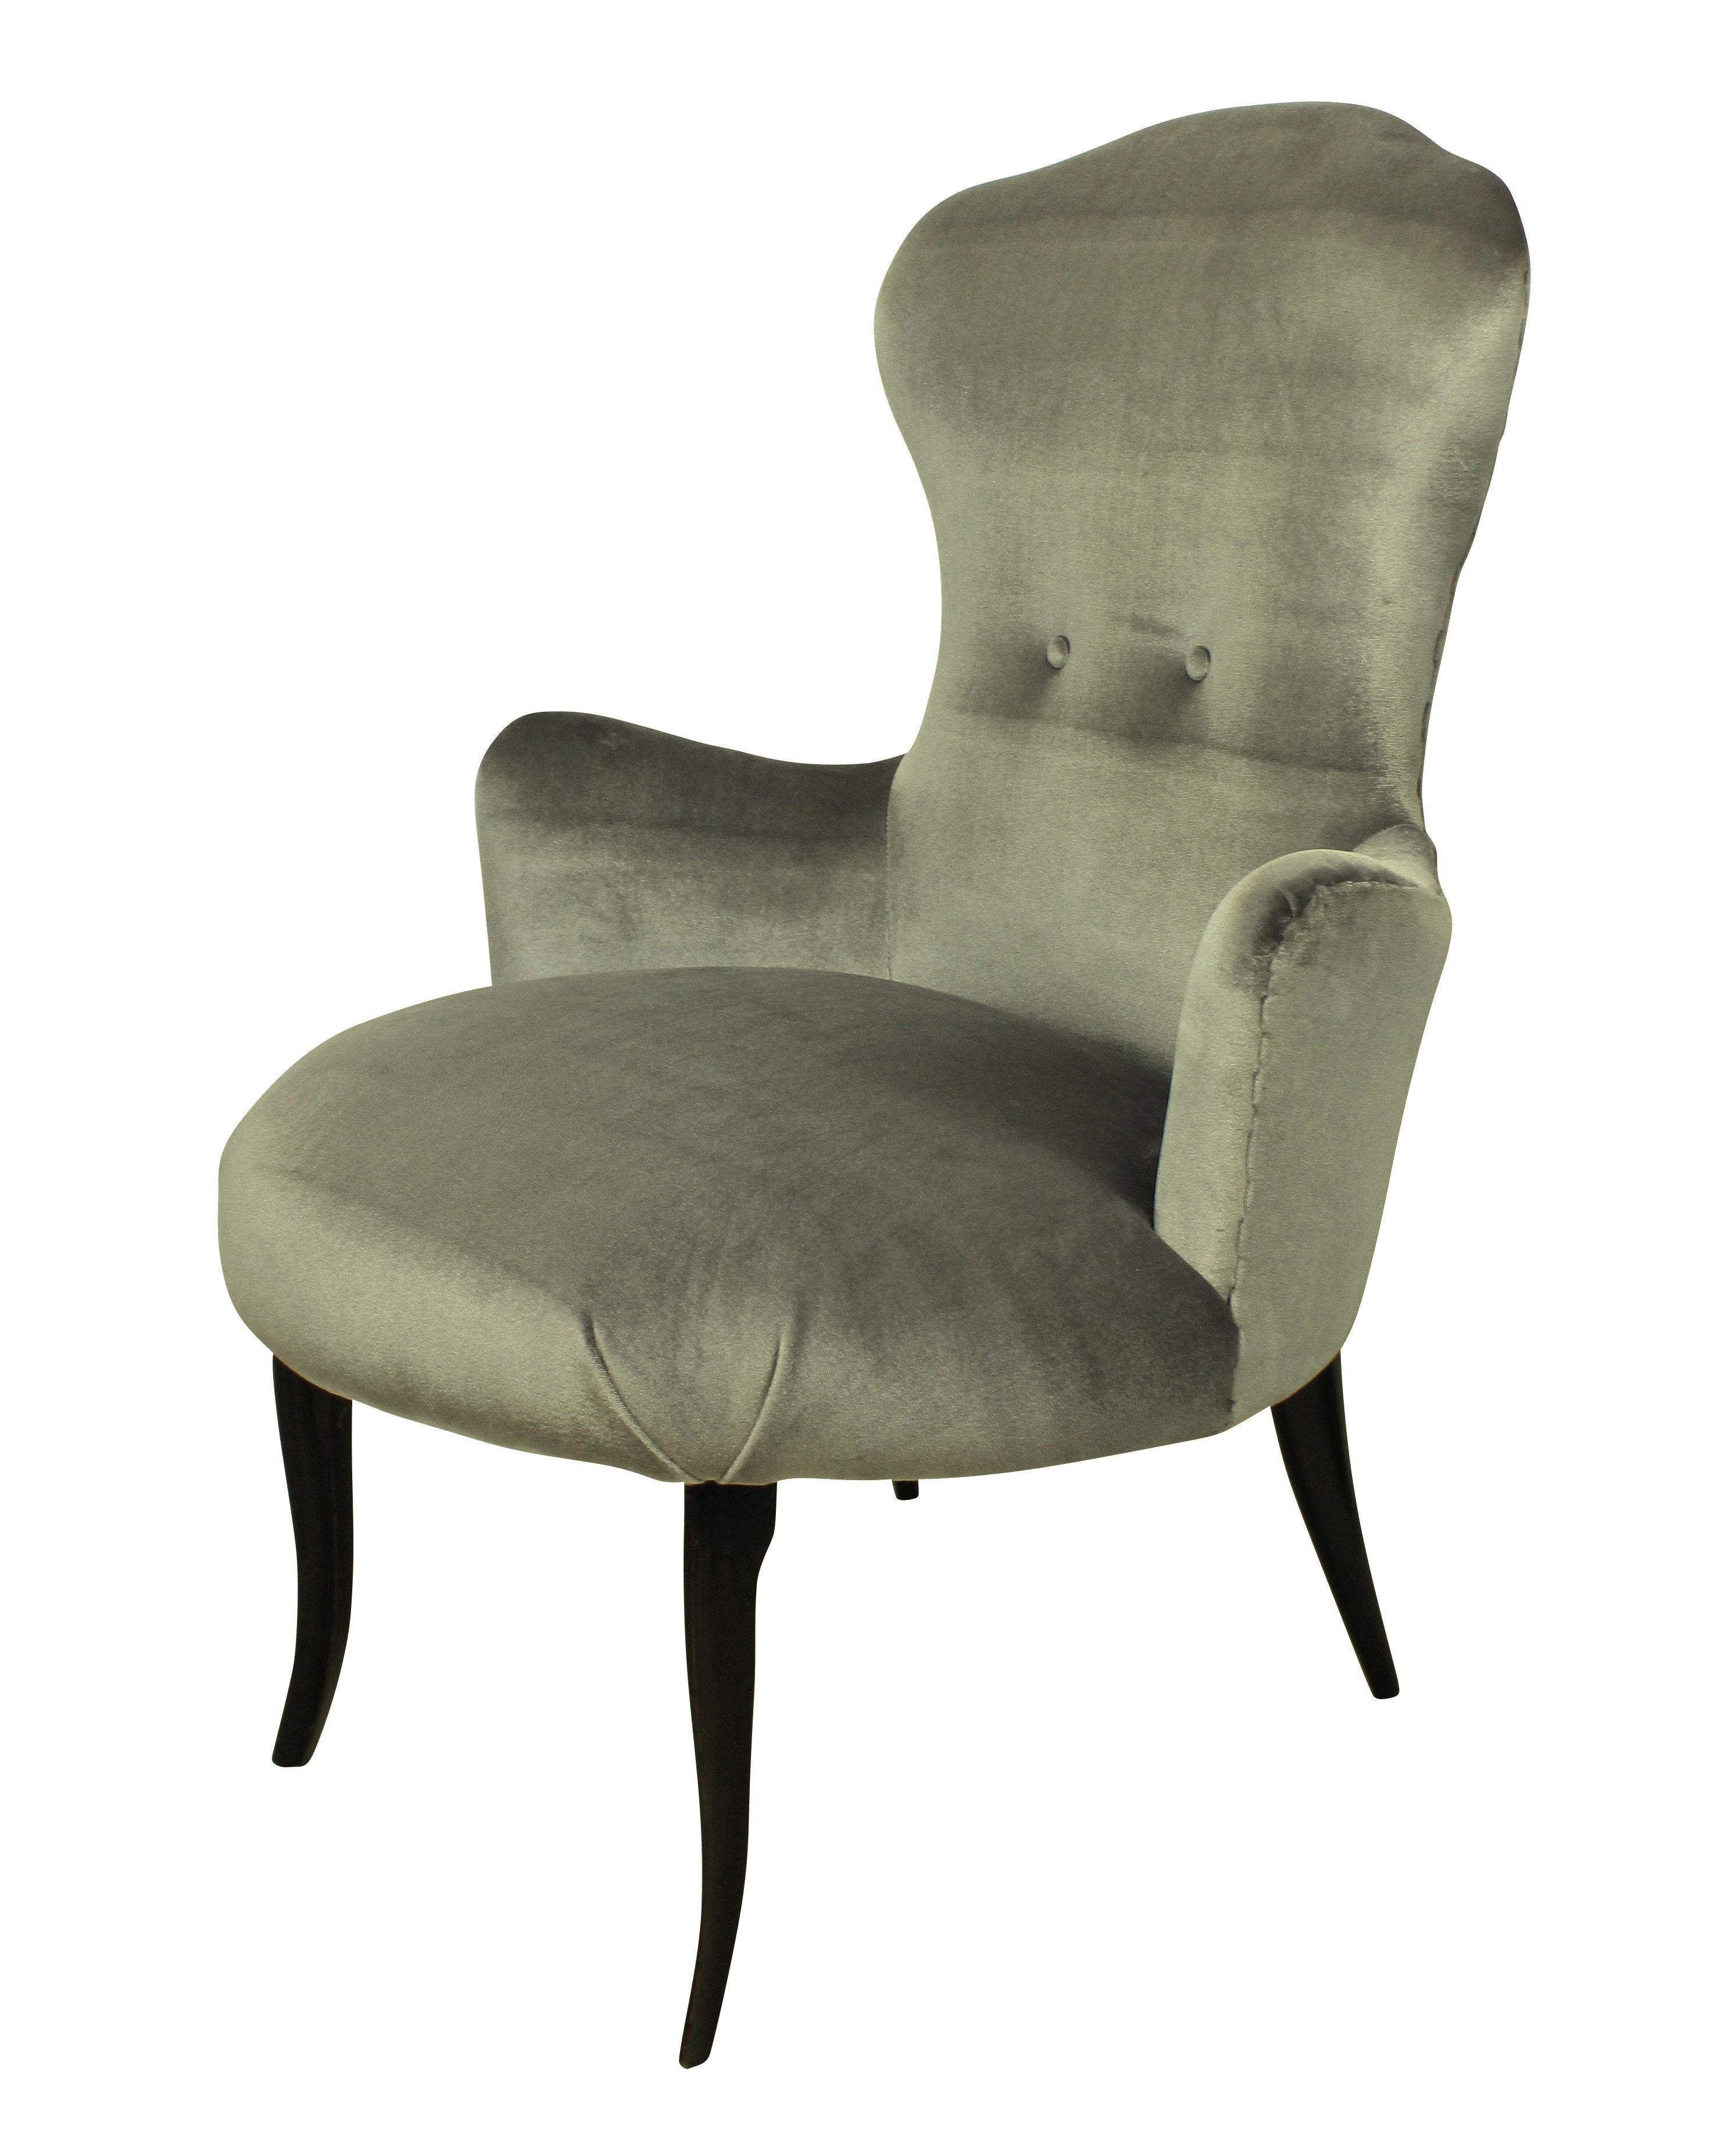 A pair of Italian bedroom chairs of elegant proportions, with cabriole legs and newly upholstered in silver velvet.